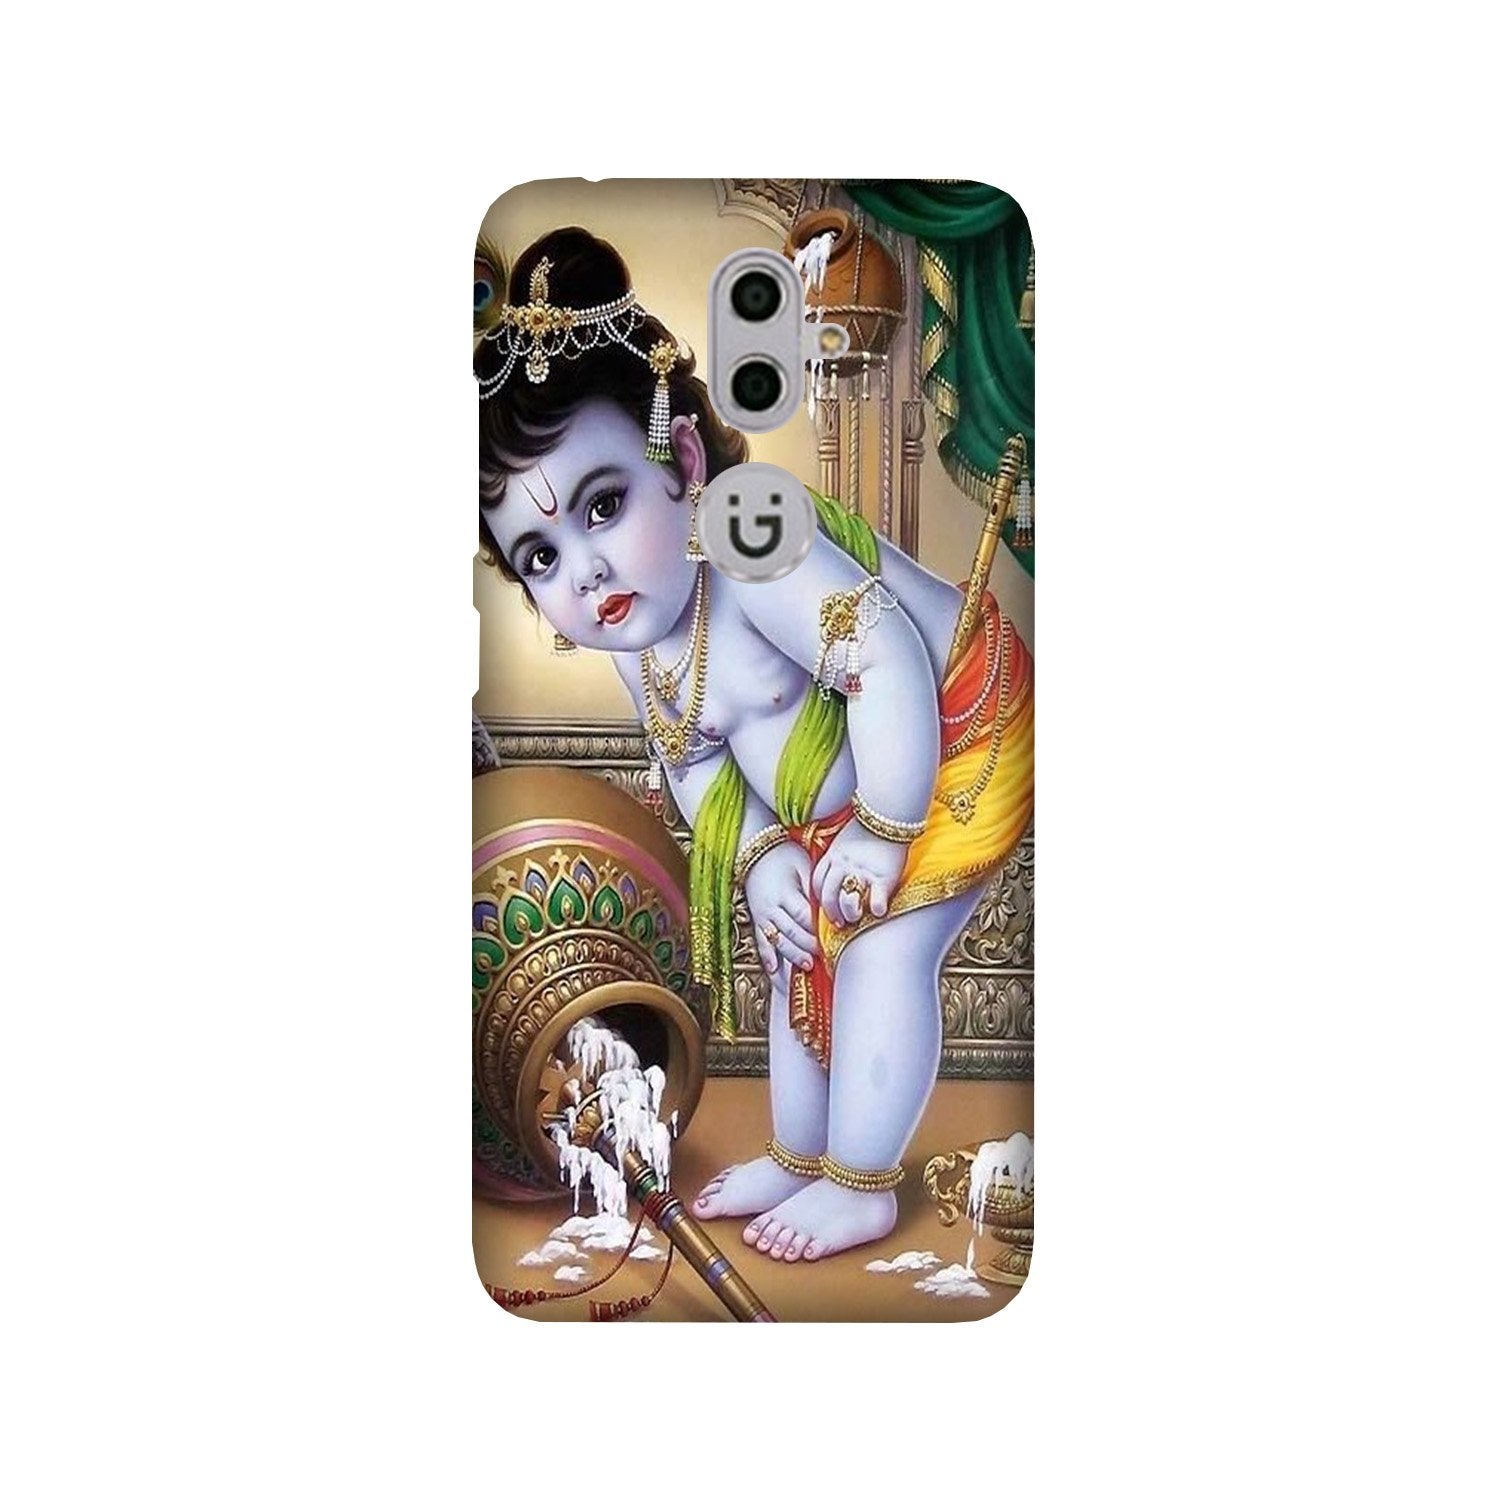 Bal Gopal2 Case for Gionee S9